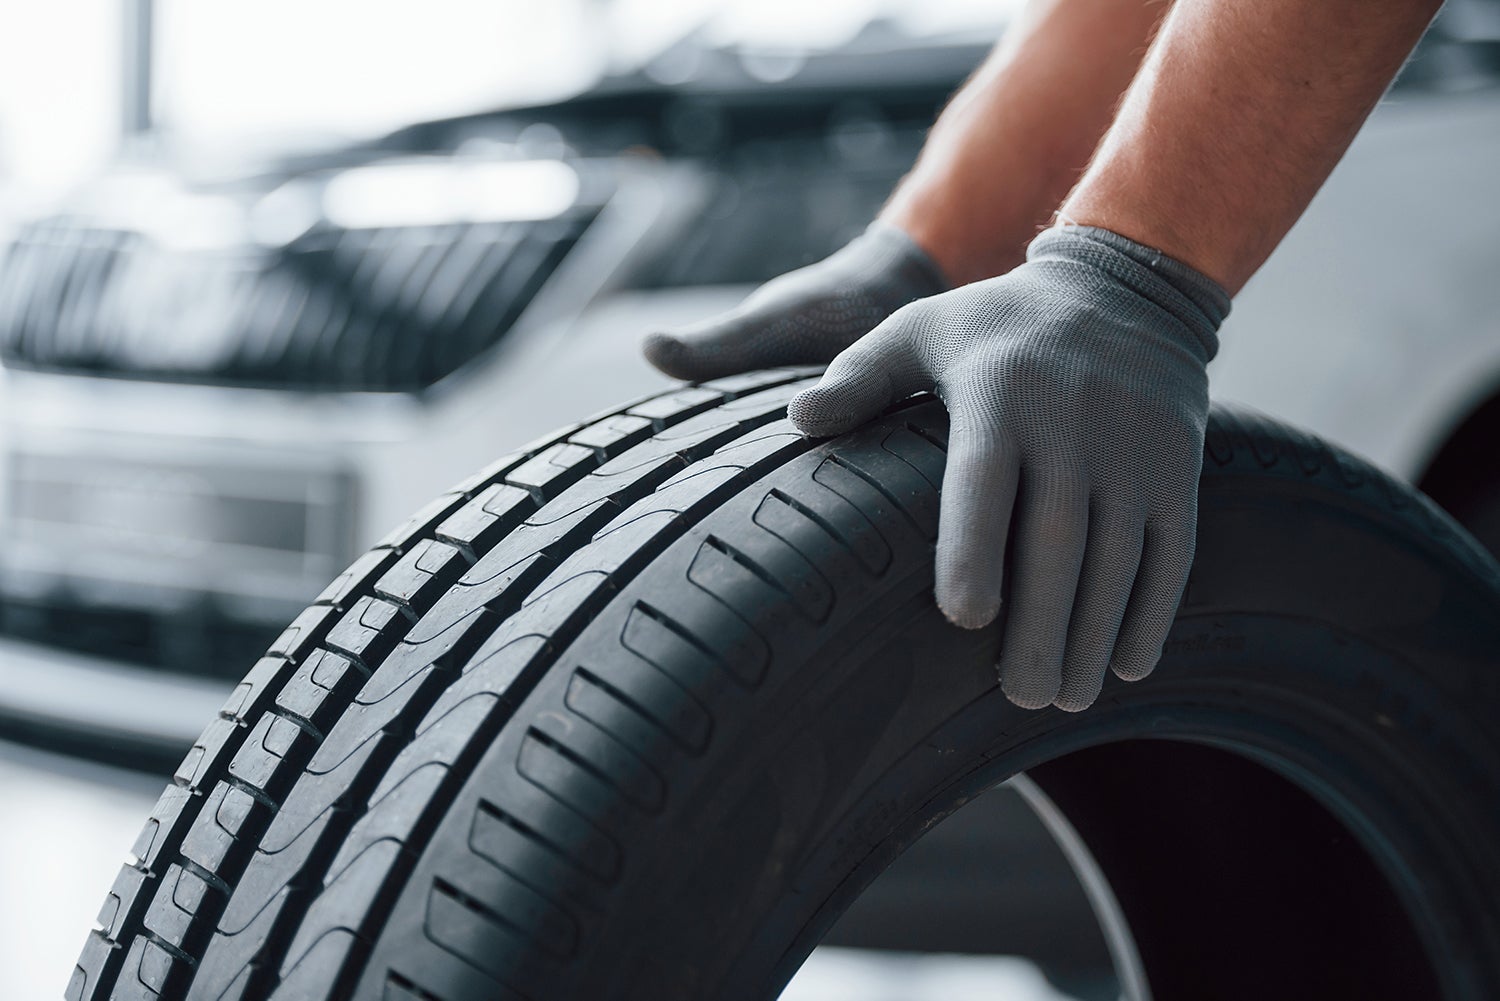 How to check your tires' health at Bennett Toyota of Allentown | Brand new tire with healthy tread depth